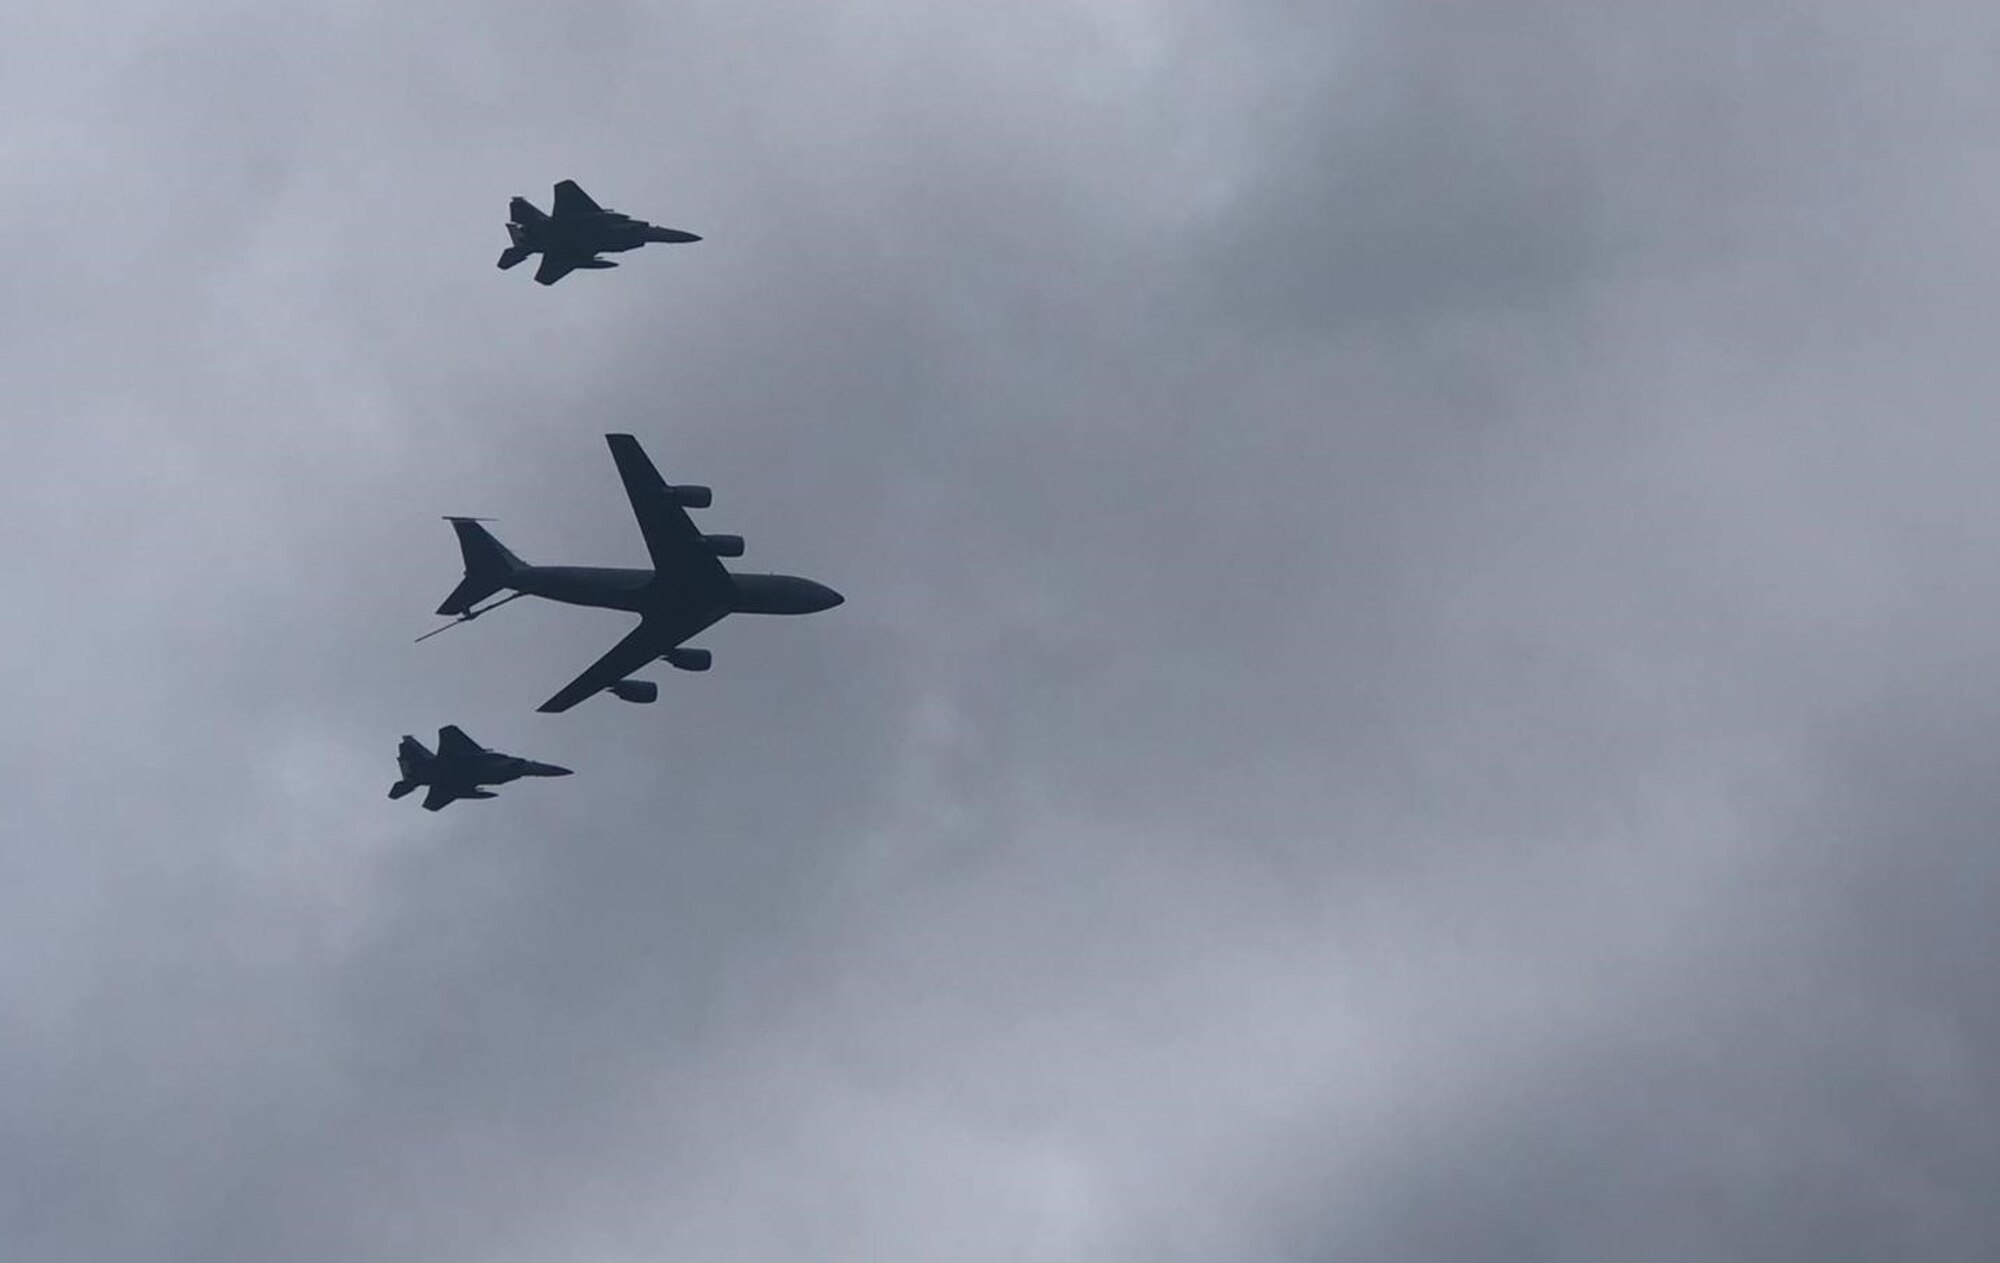 Two U.S. Air Force F-15 Eagle aircraft from Royal Air Force Lakenheath and a U.S. Air Force KC-135 Stratotanker aircraft from Royal Air Force Mildenhall fly over Lielvarde Air Base, Latvia during an instrument flight rules certification ceremony, September 2021.